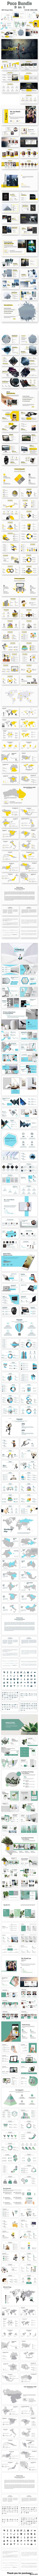 GraphicRiver - Poco Bundle 3 in 1 PowerPoint Template 22605805